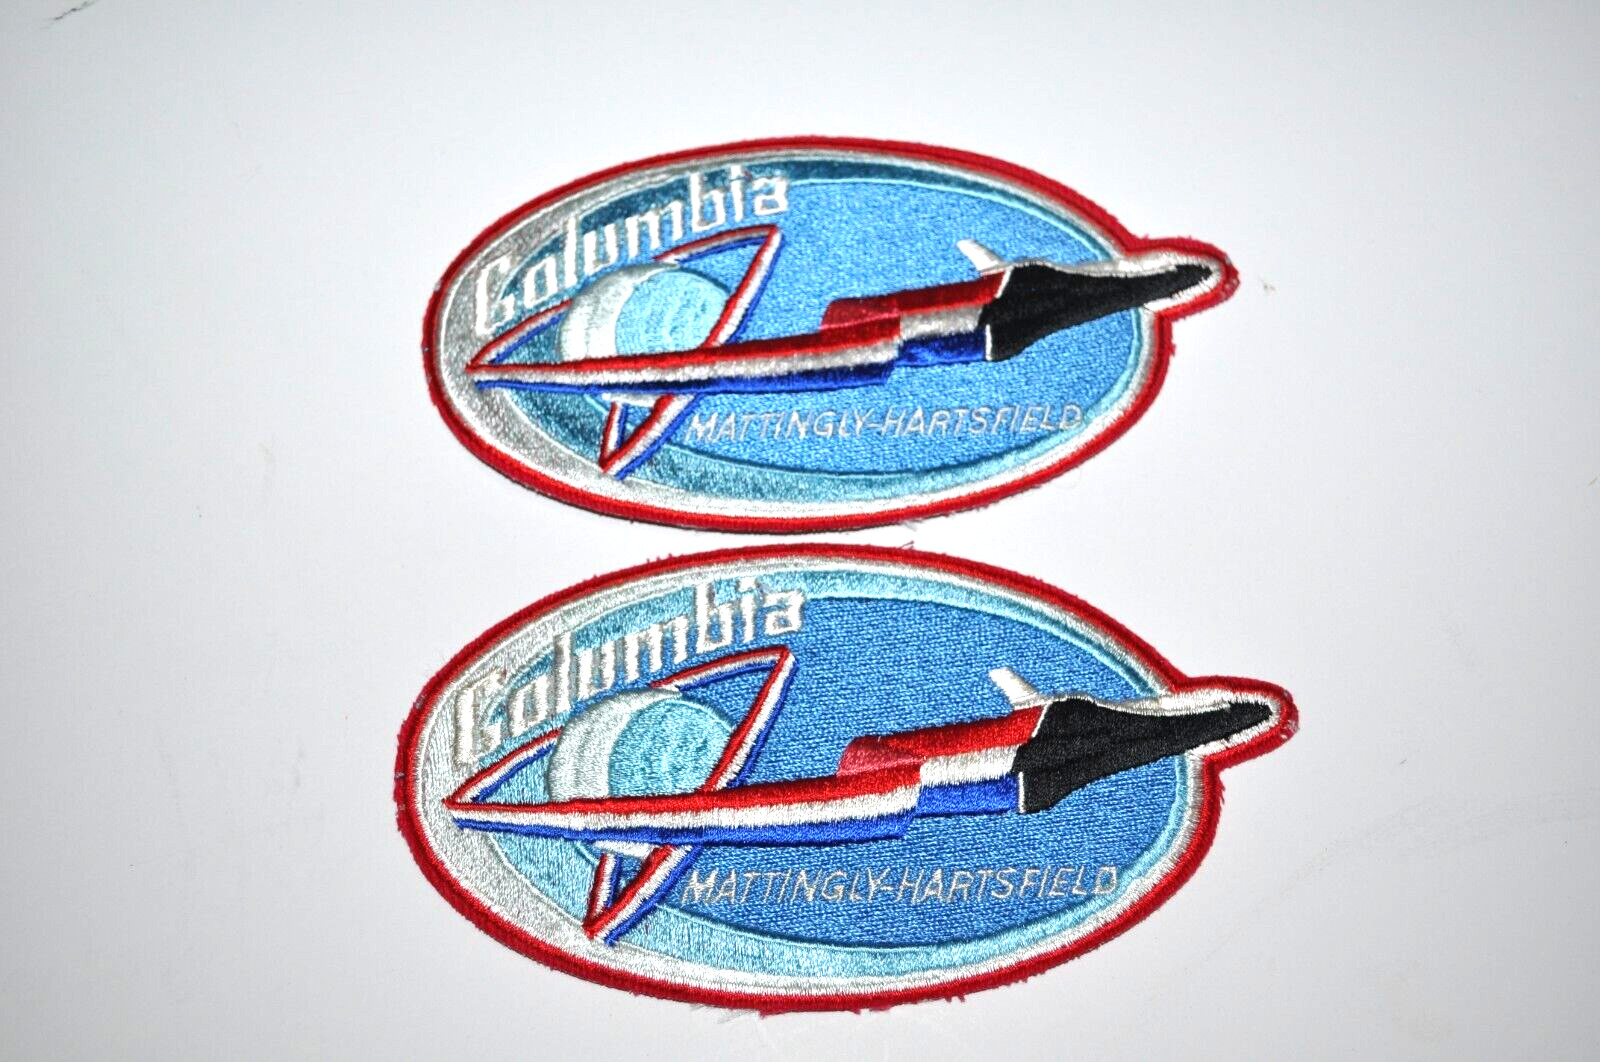 Lot of 2 Vintage SPACE SHUTTLE COLUMBIA STS-4 Patches Mattingly -Hartsfield